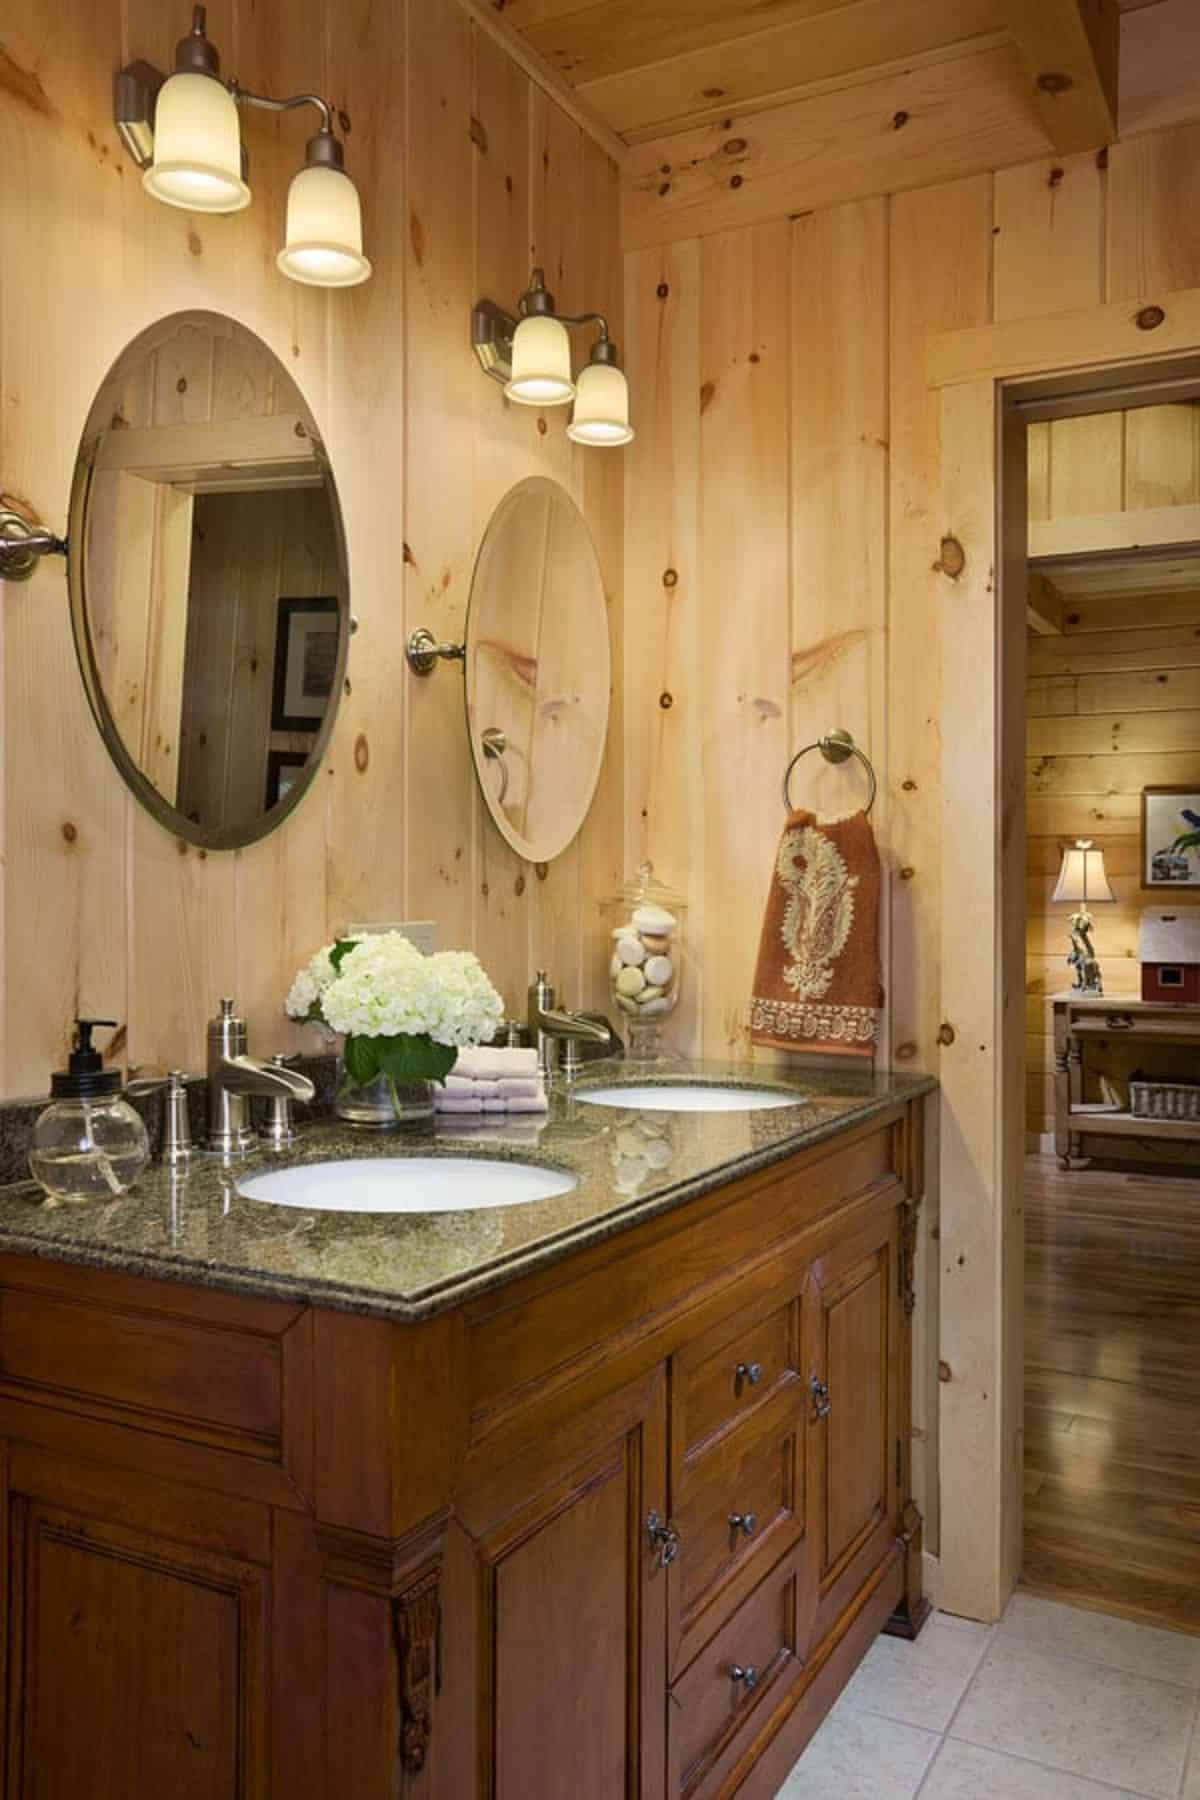 wood cabinet with white sink in bathroom with round mirrors above